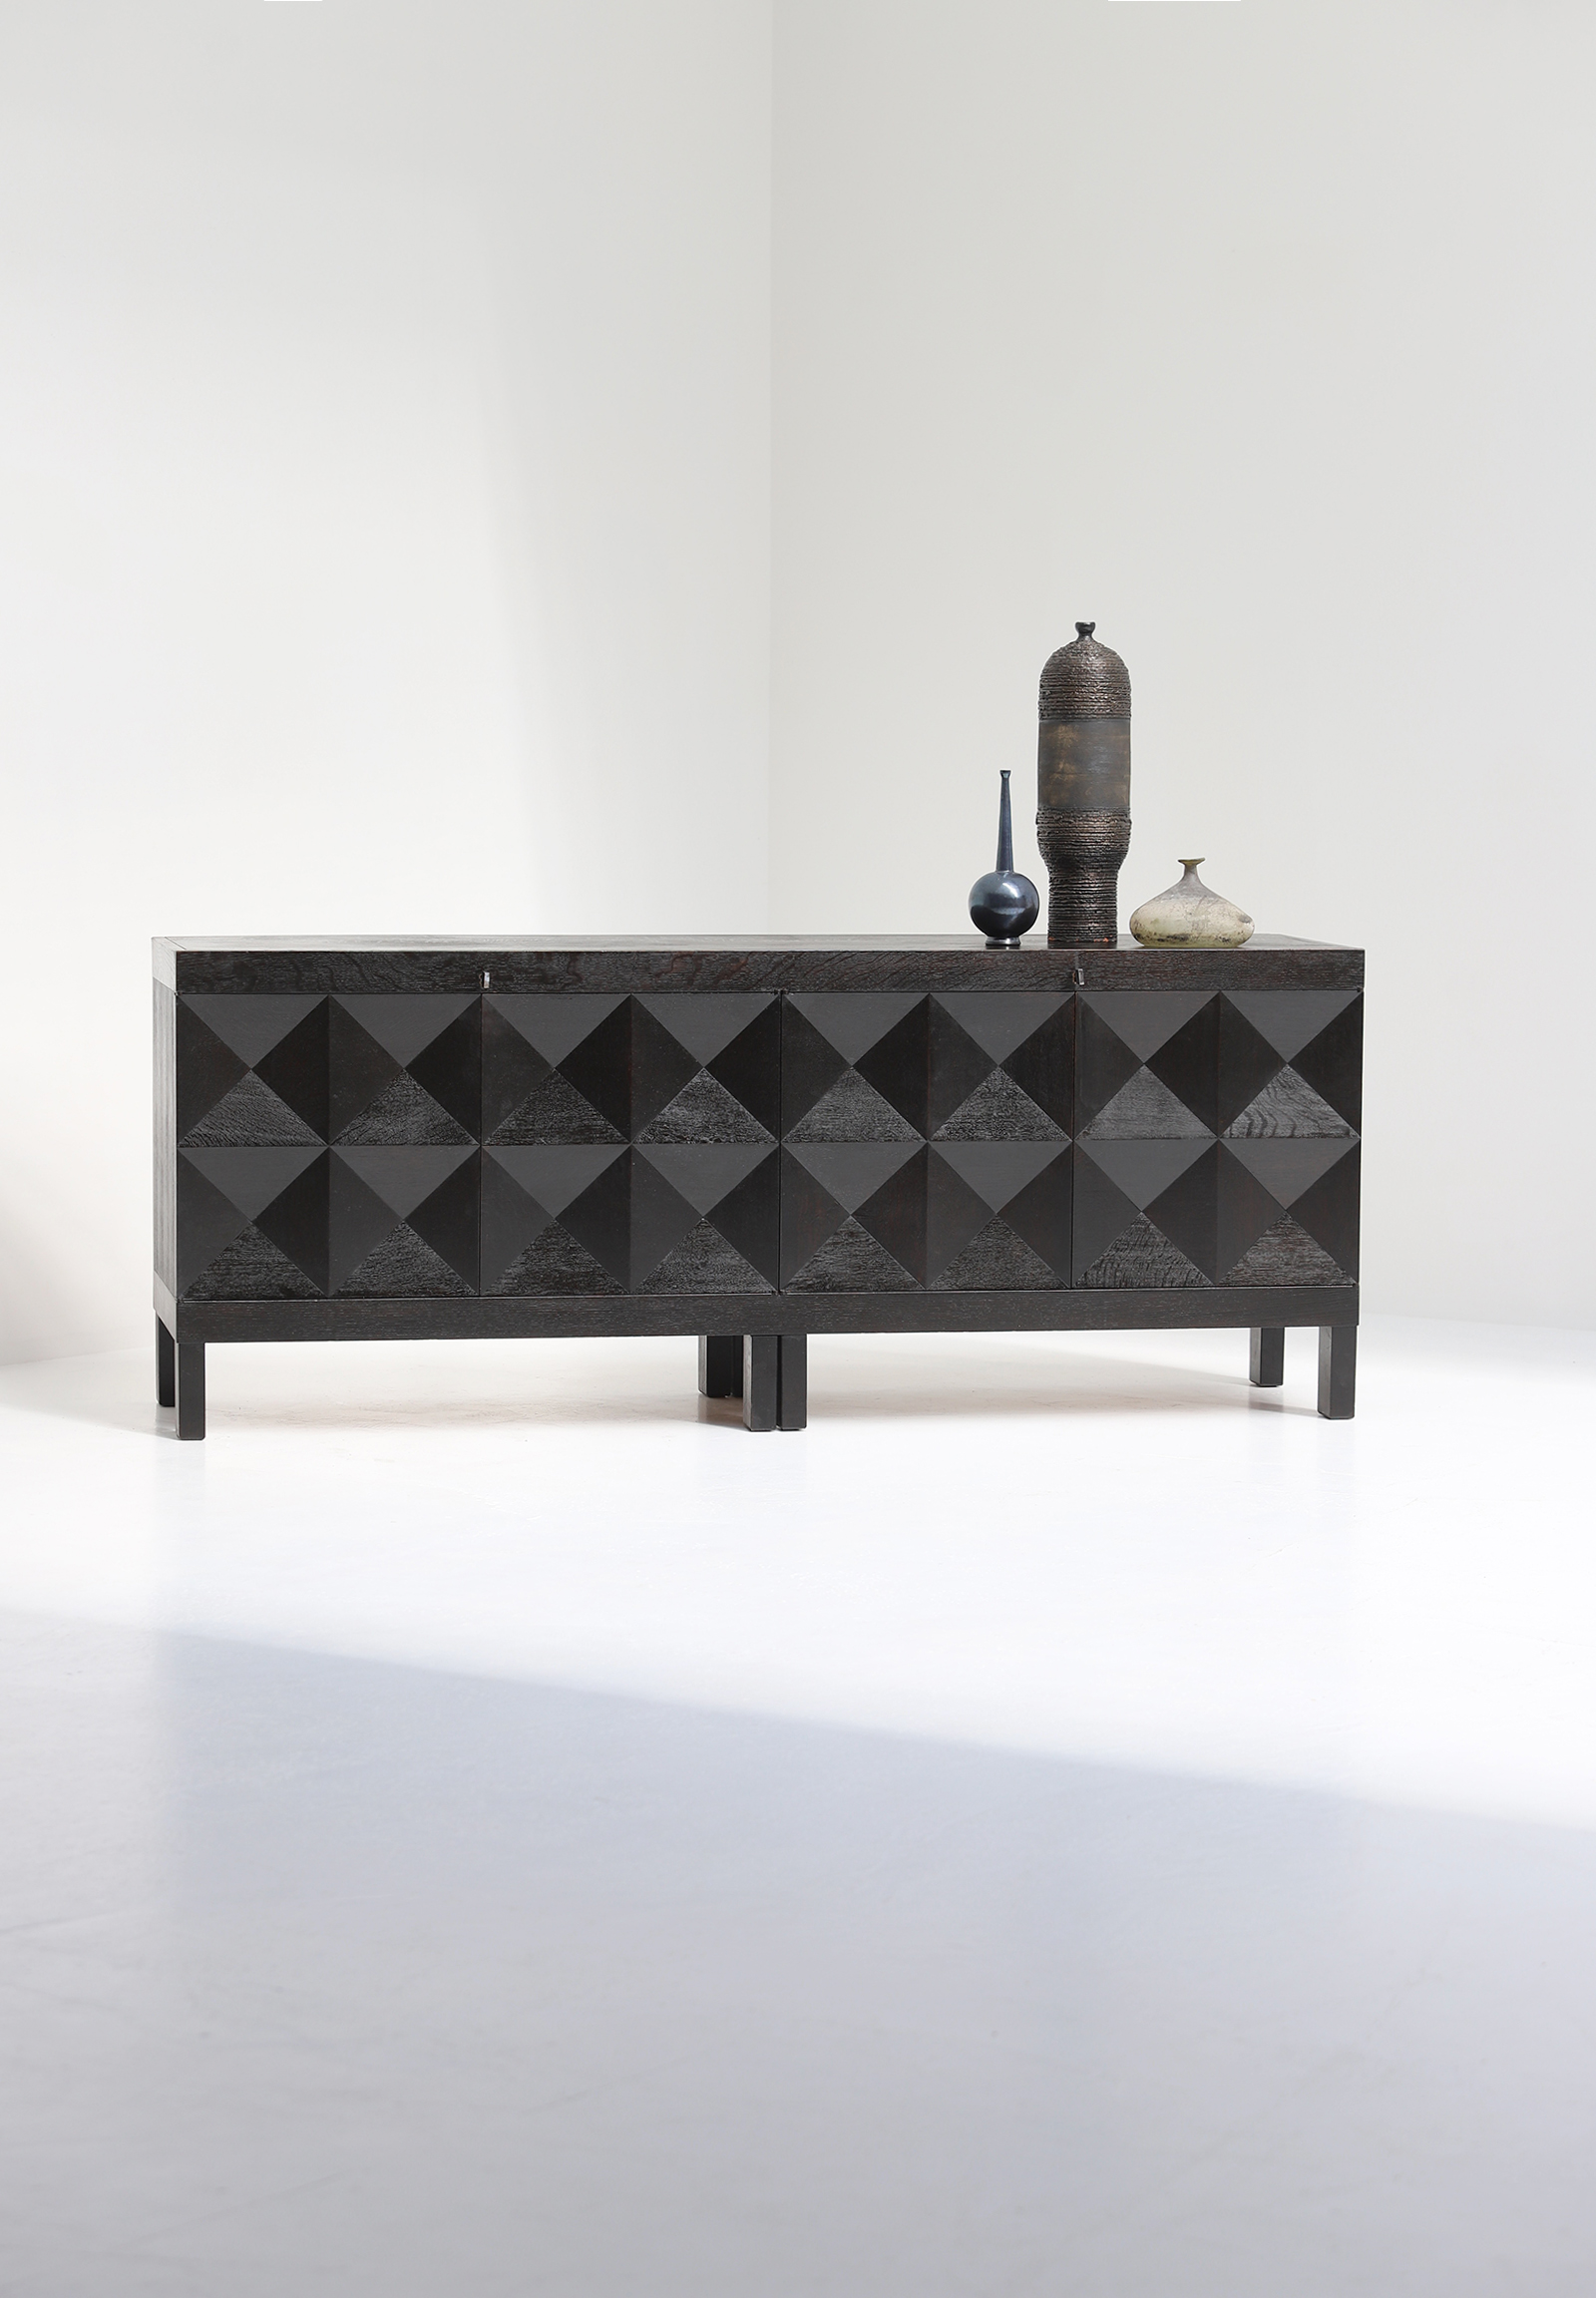 quality crafted sideboard with op-art doors designed by J. Batenburg for MI, Belgium 1969image 1